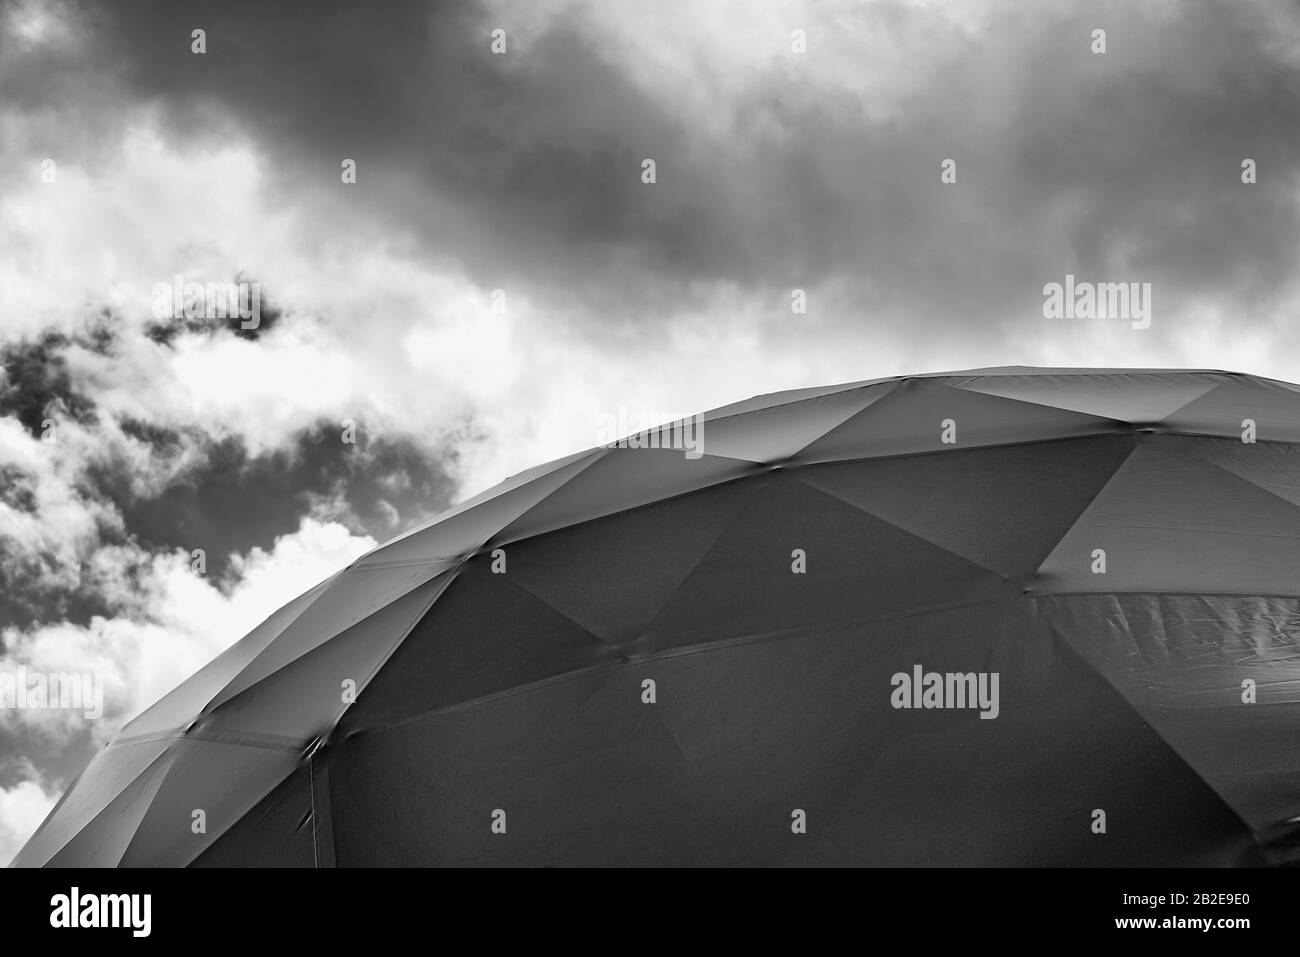 Plastic black and white dome at an event Stock Photo